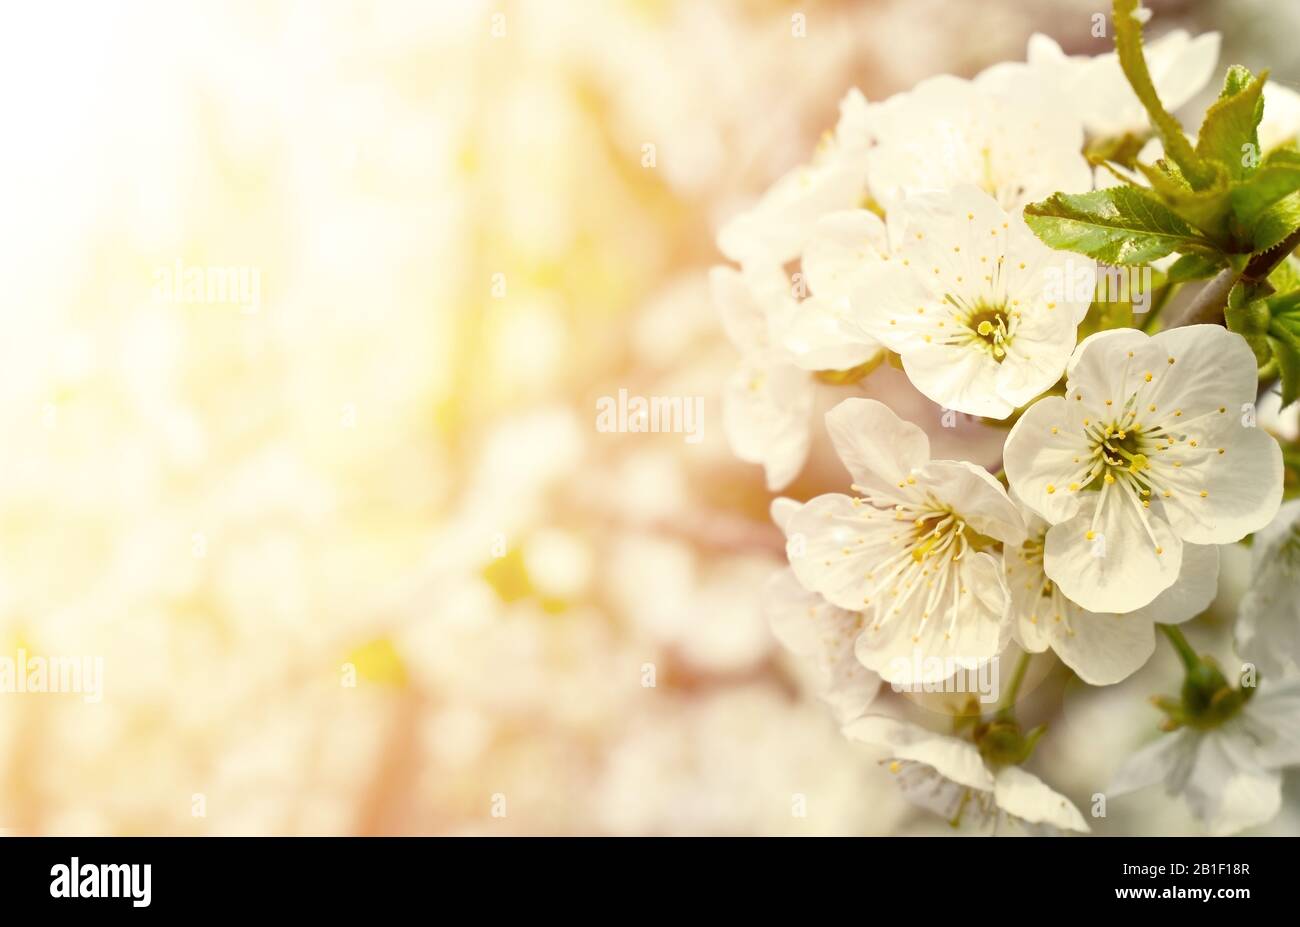 Spring background. White plum tree flowers in the sunshine. Fruit branch close up. Copy space. Stock Photo